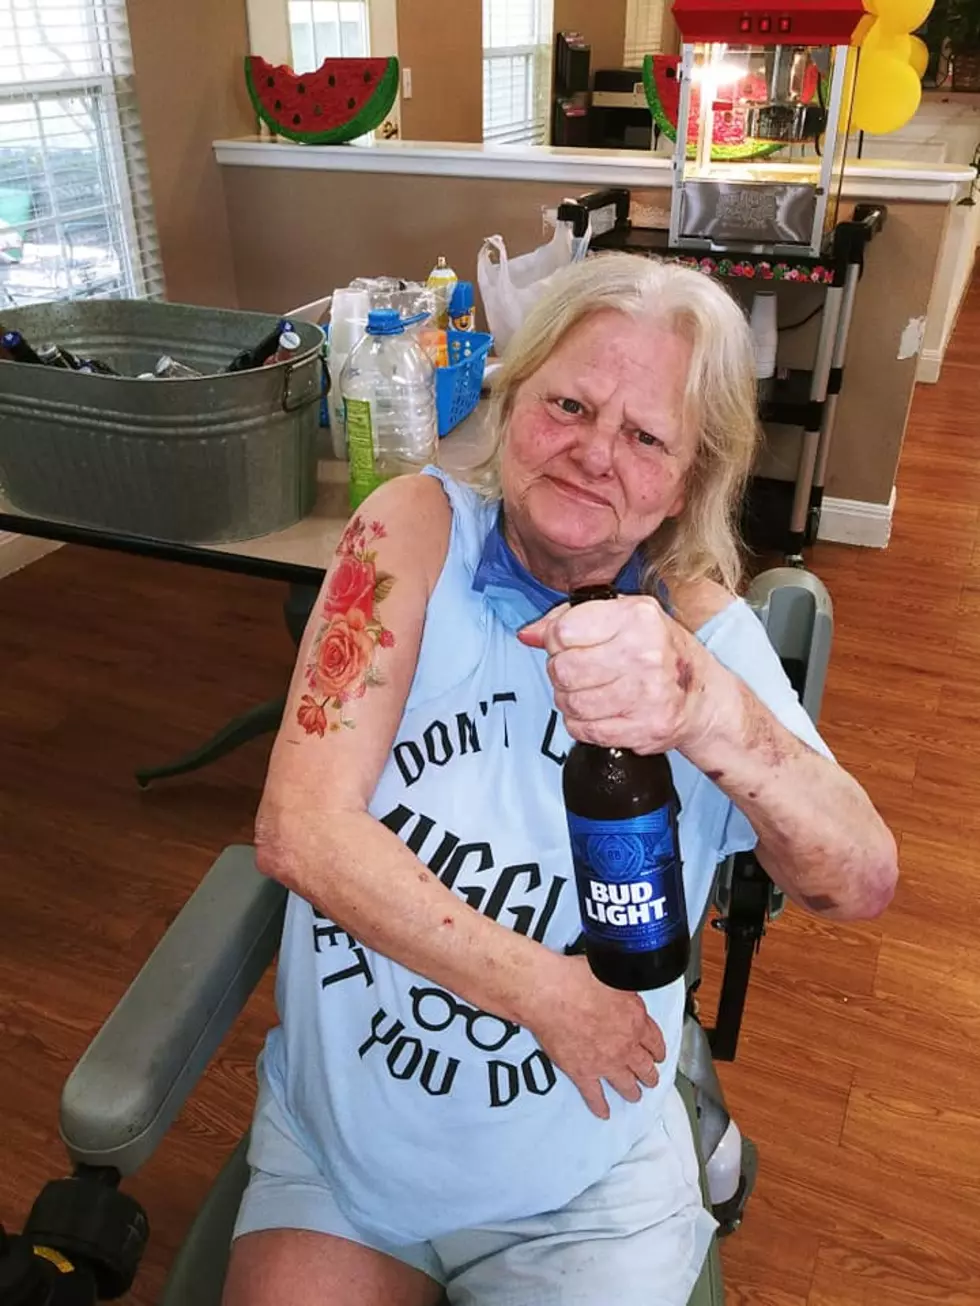 Texas Assisted Living Facility Holds Beer and Temporary Tattoo Night